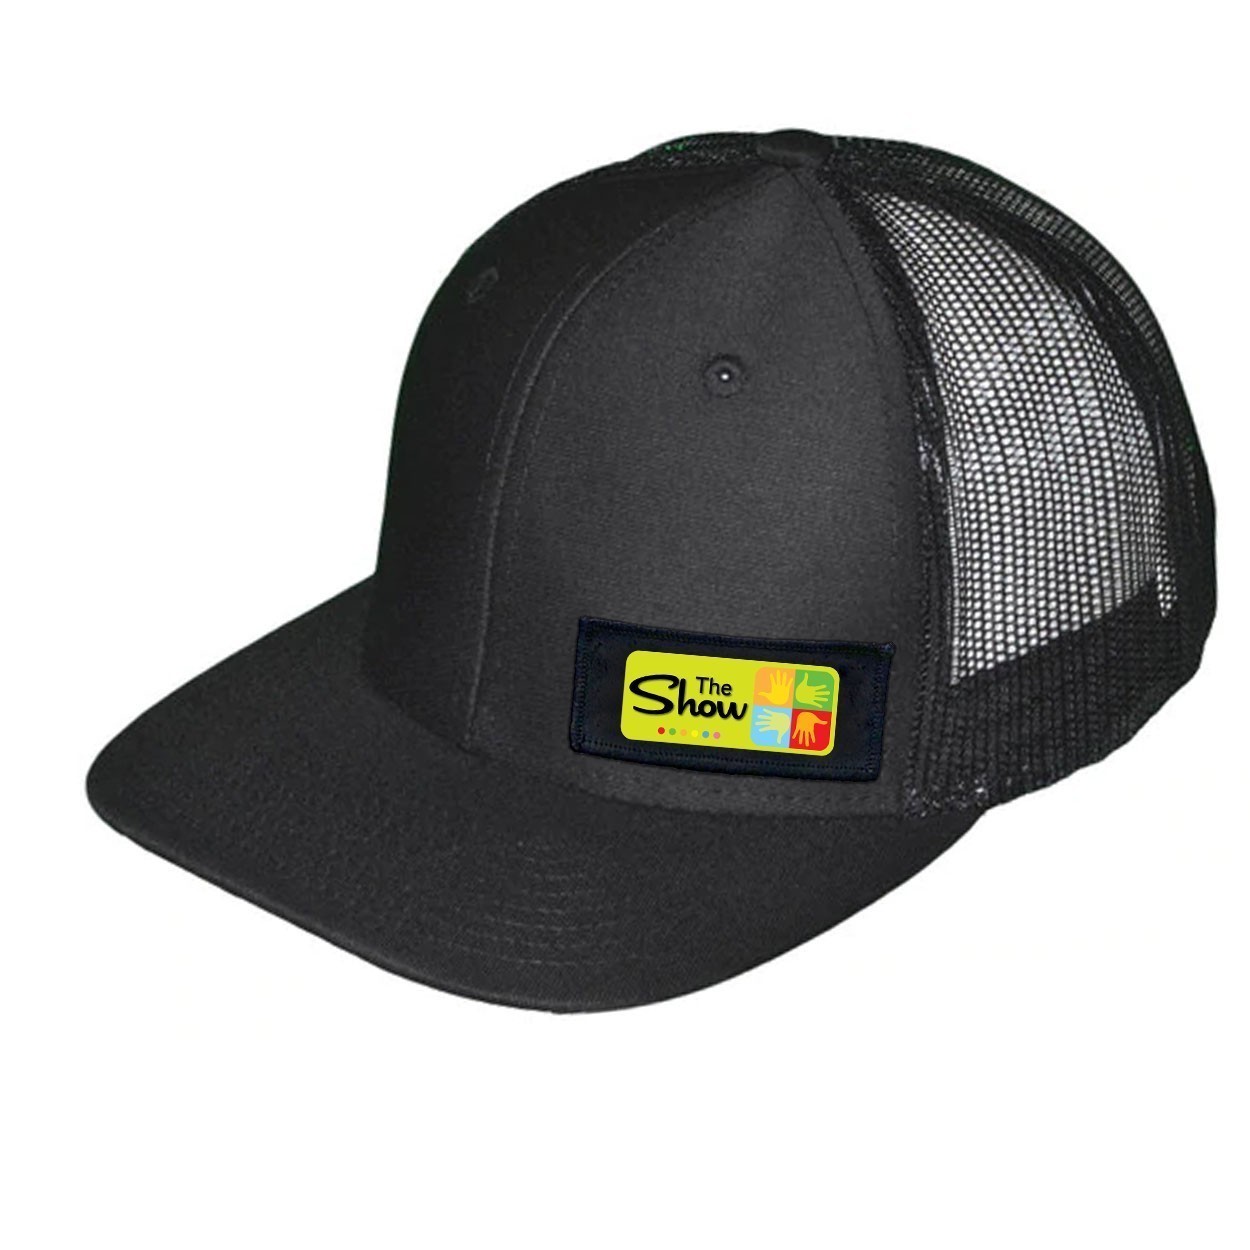 The Show Art Gallery Night Out Woven Patch Snapback Trucker Hat Black (White Logo)